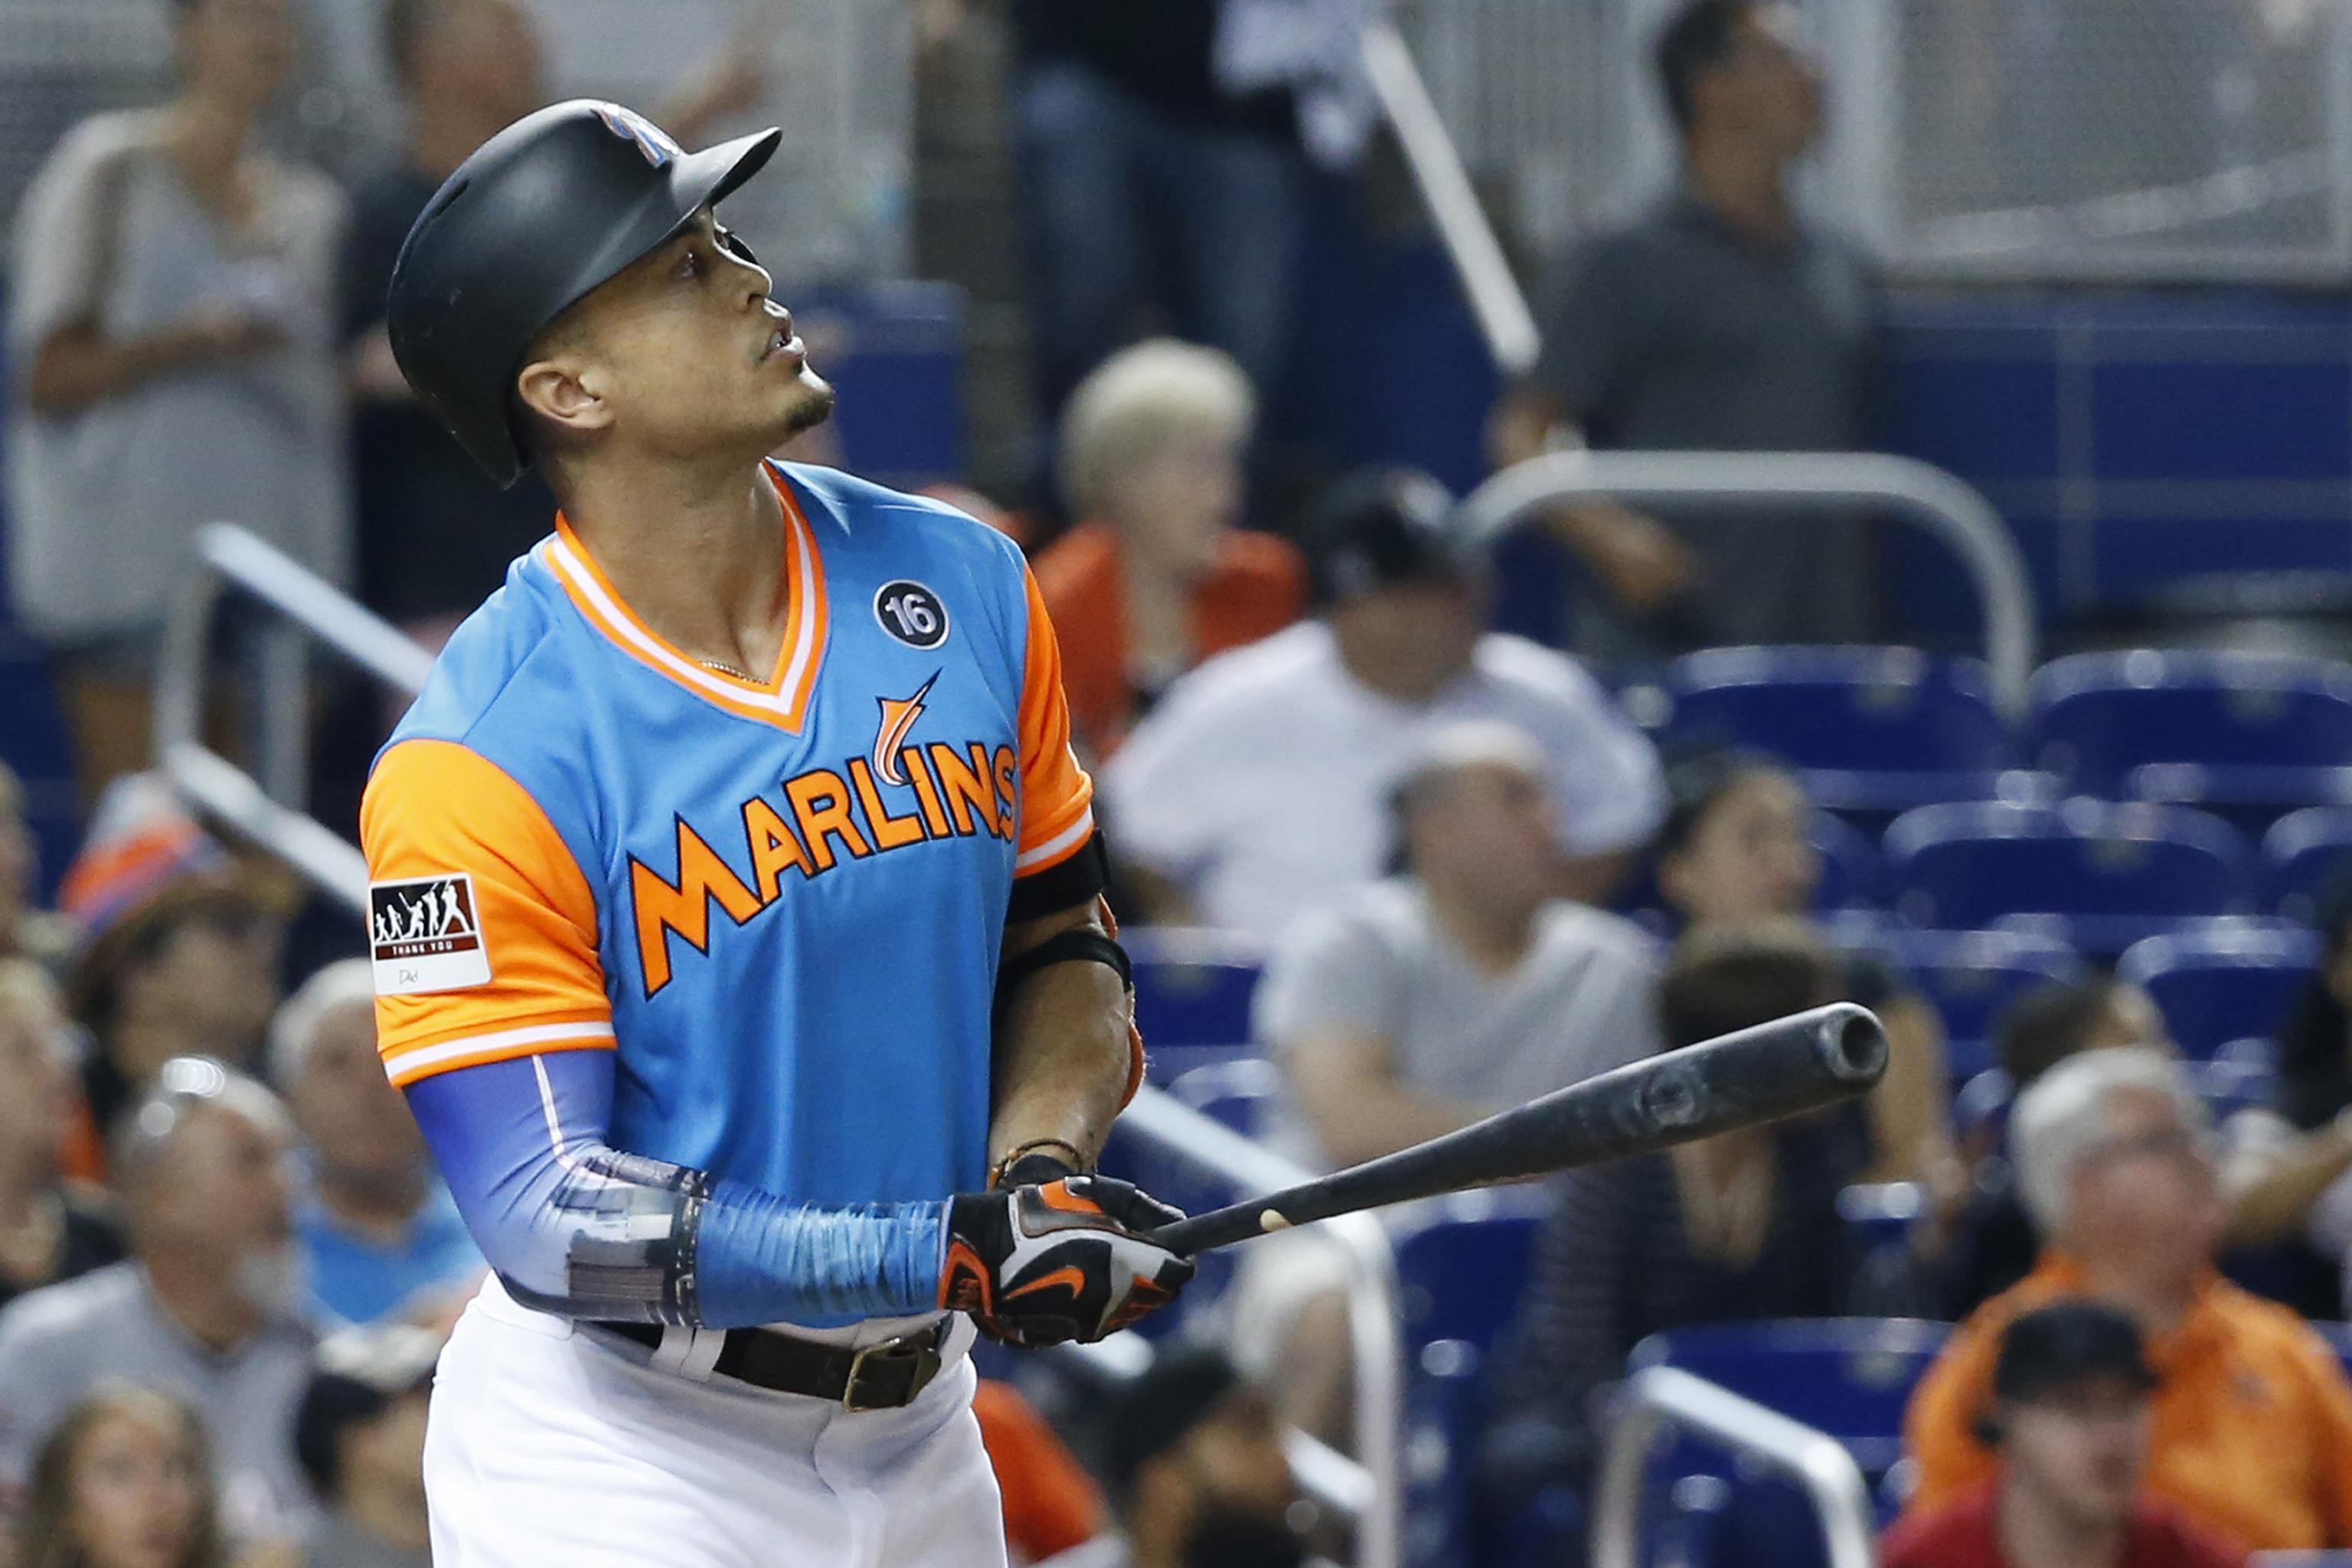 Giancarlo Stanton setting torrid pace in hitting home runs for Marlins